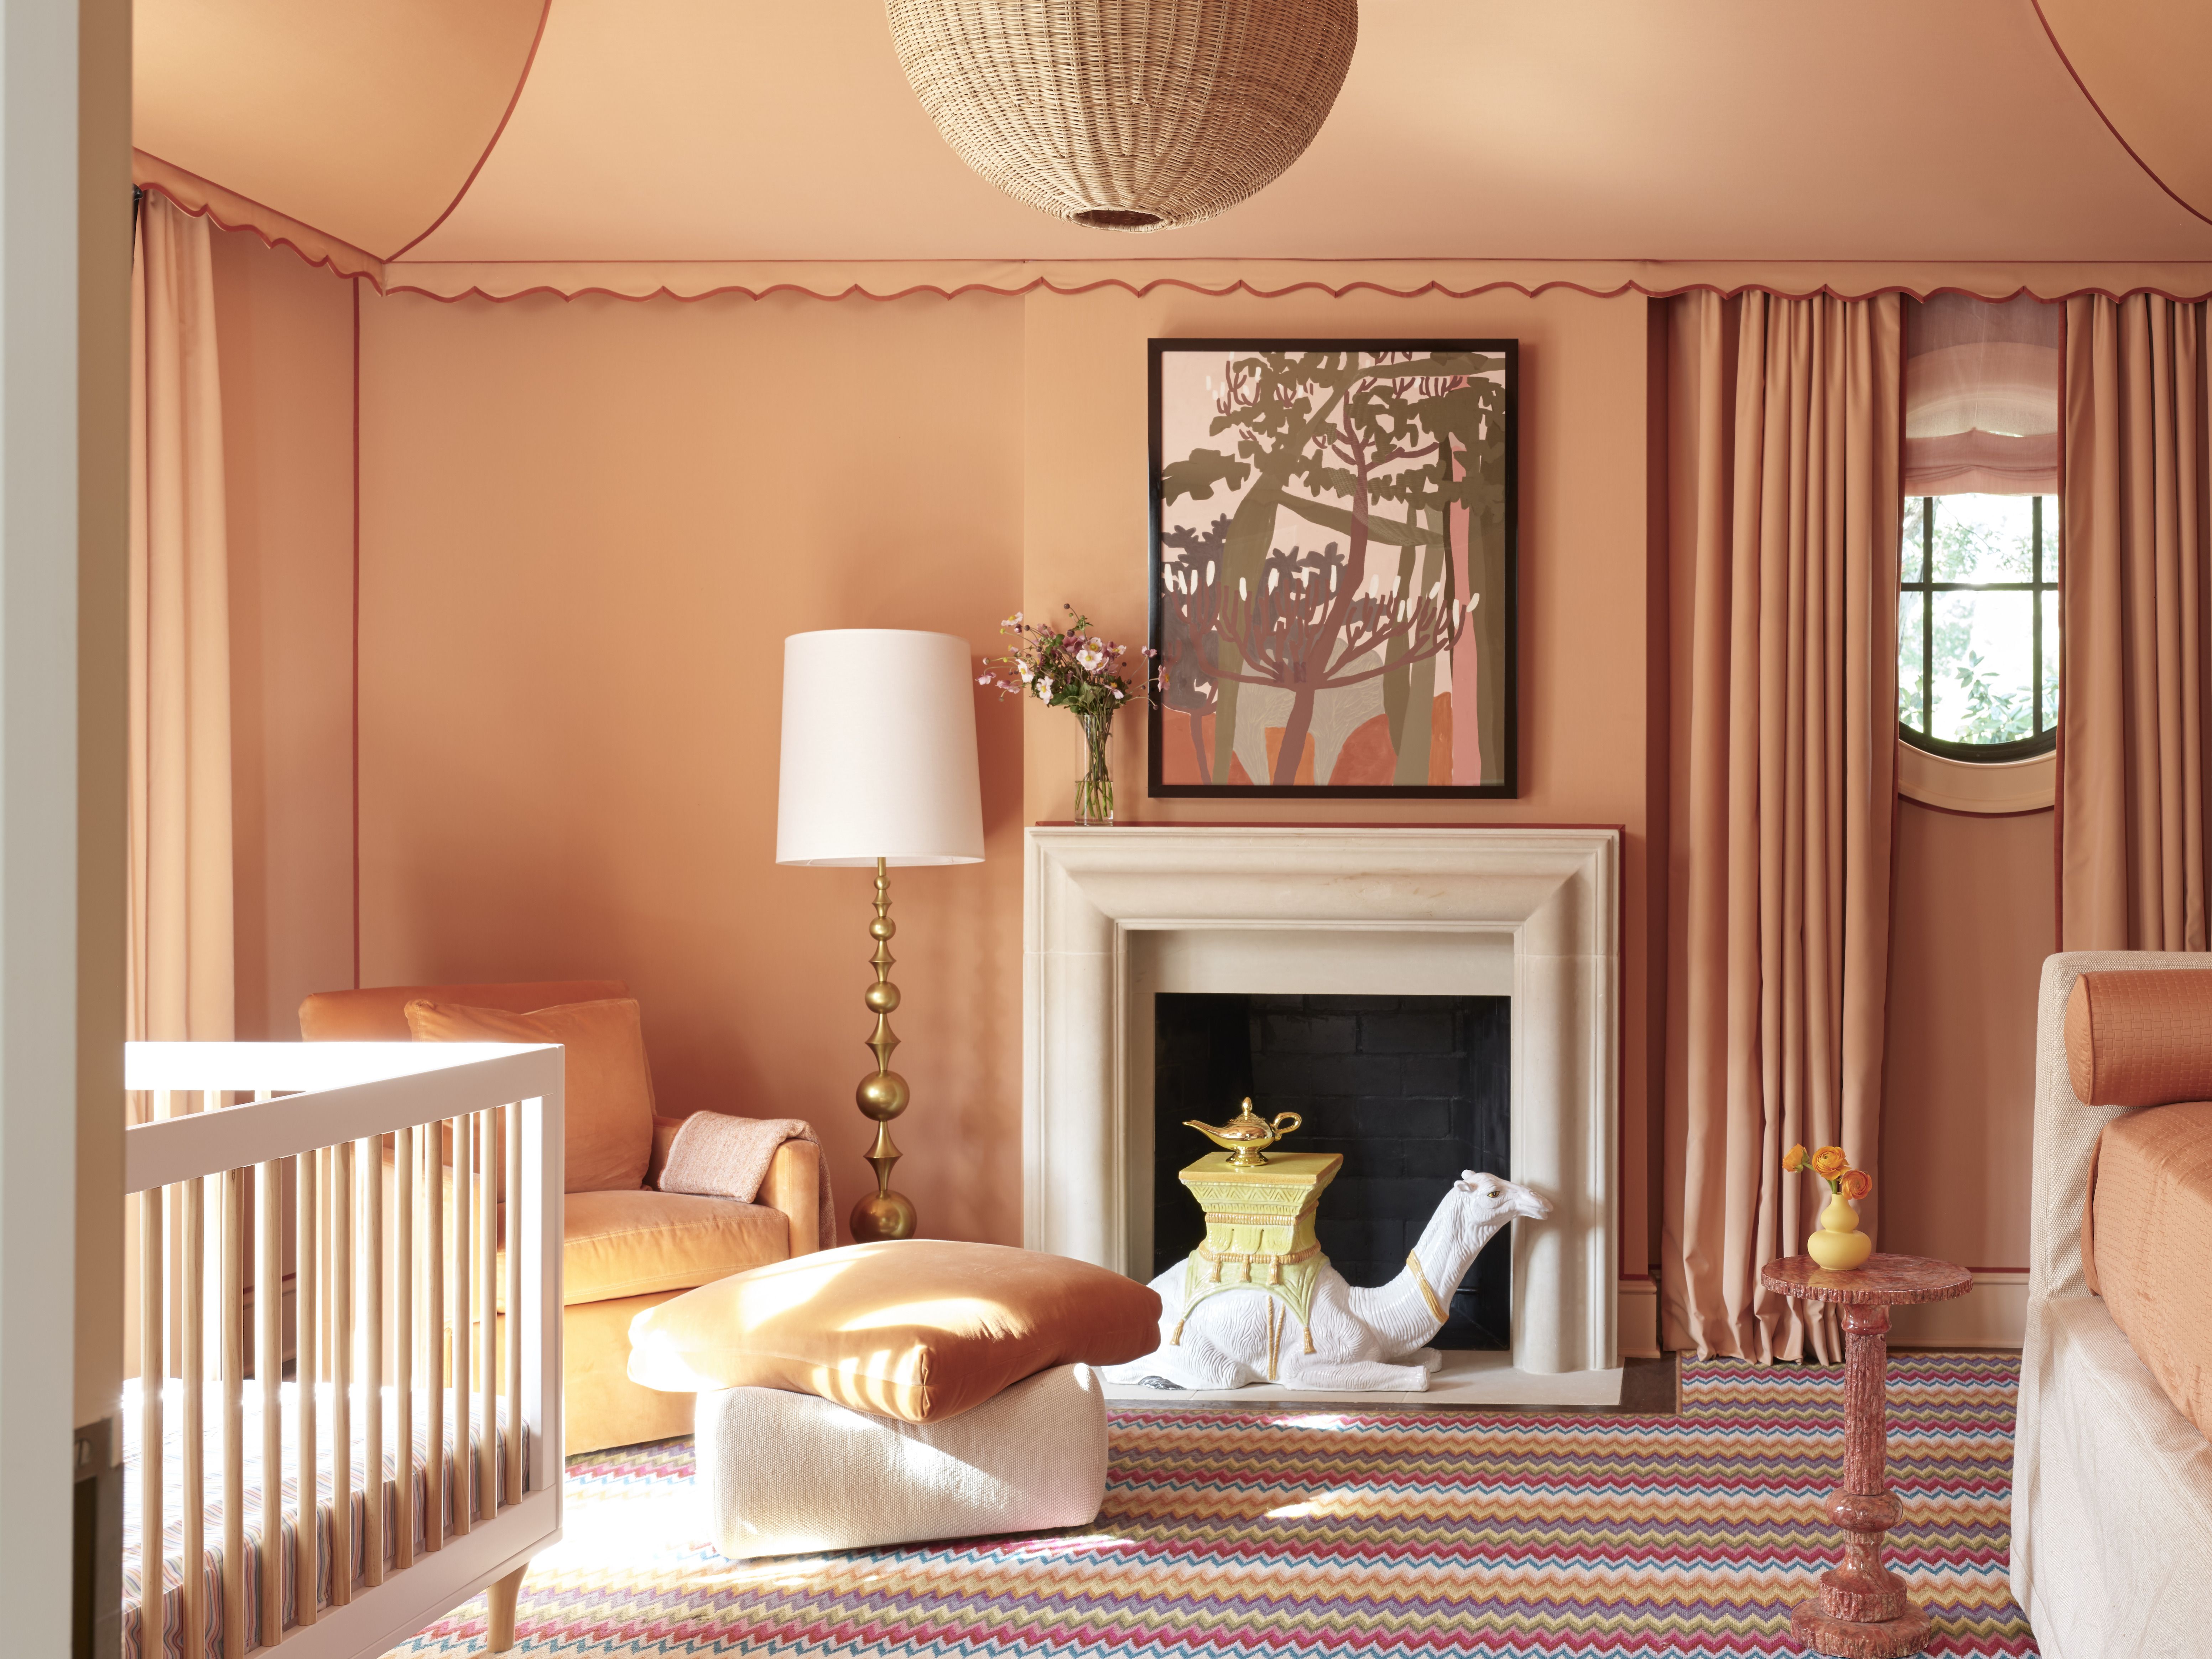 62 Unexpected Room Colors 2021 Best Room Color Combinations